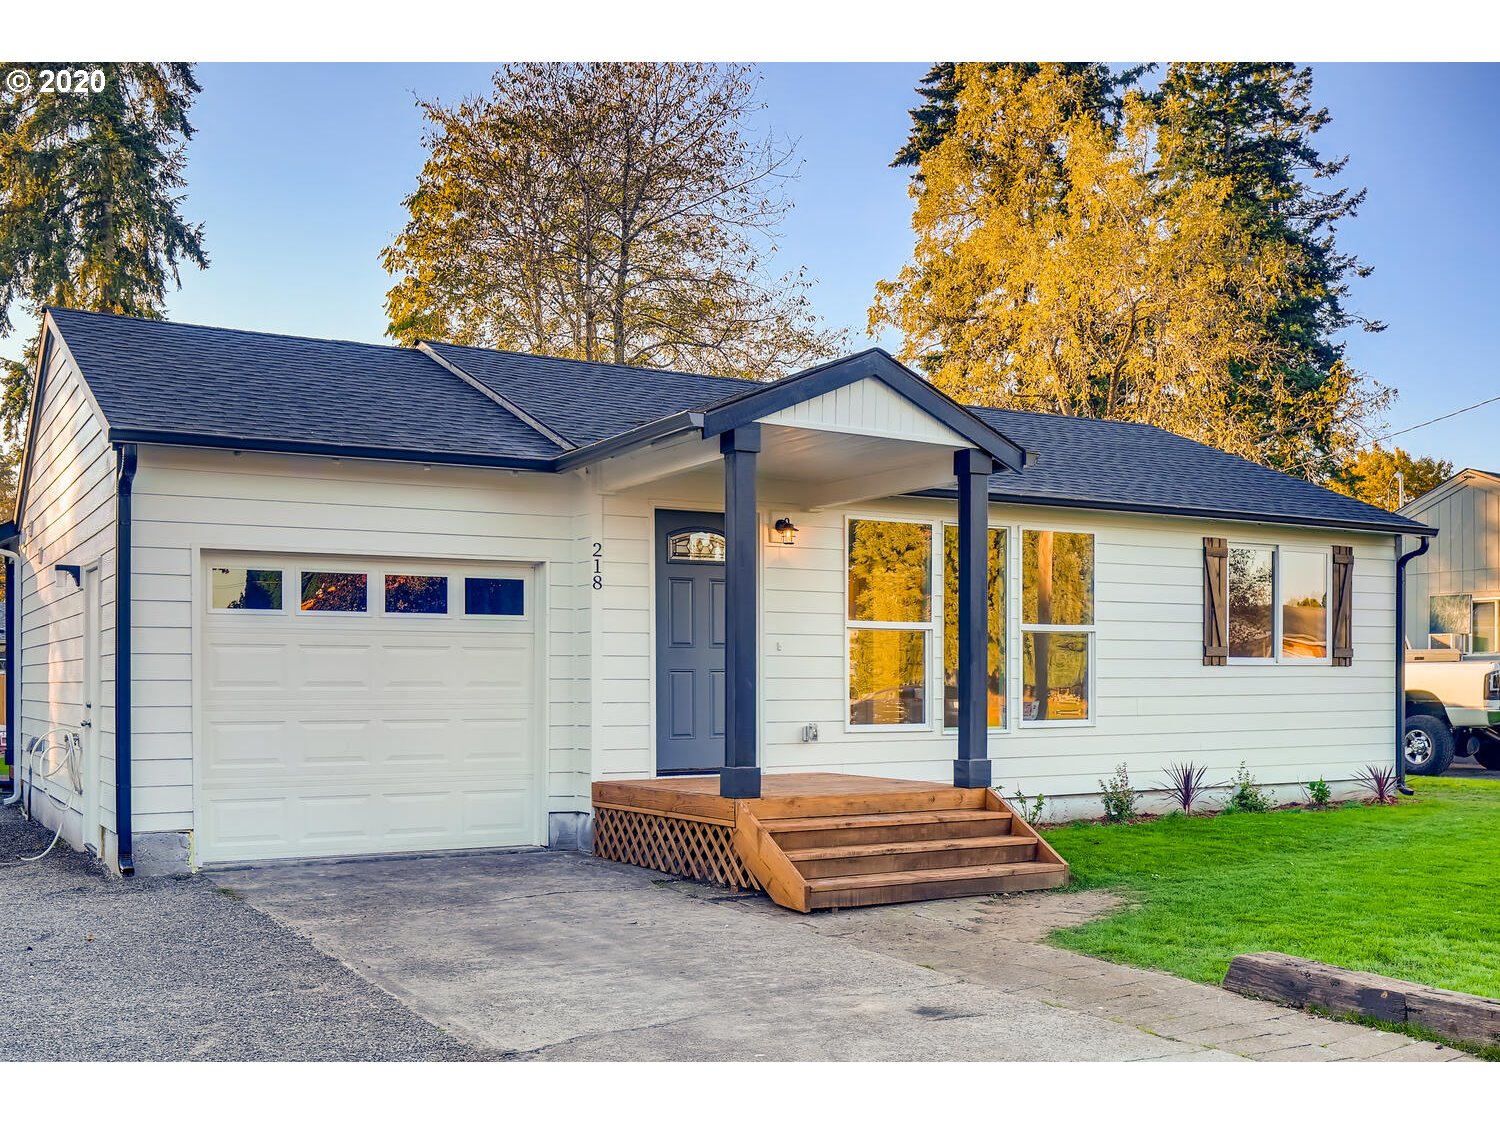 218 SE 103RD AVE (1 of 28)